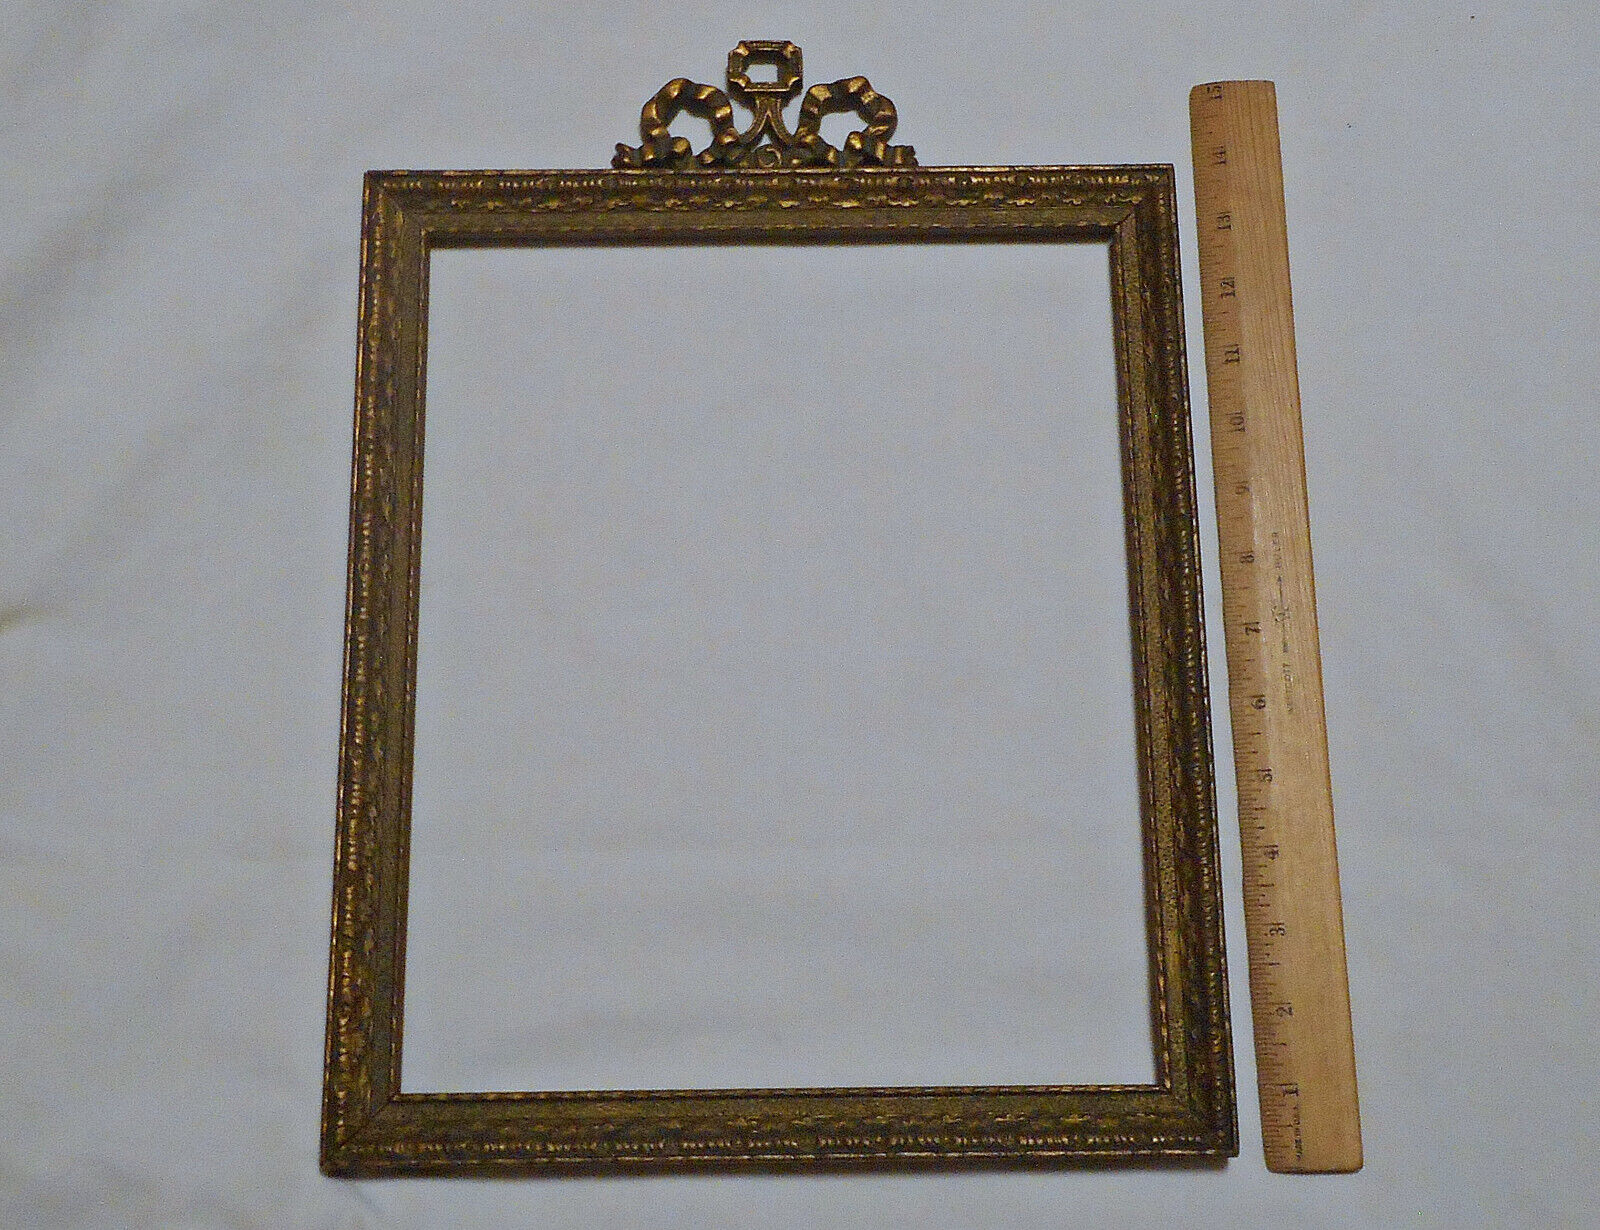 Antique Ornate Wooden Picture Frame Cast Iron Bow EJS Mfg Co NYC 85 10\